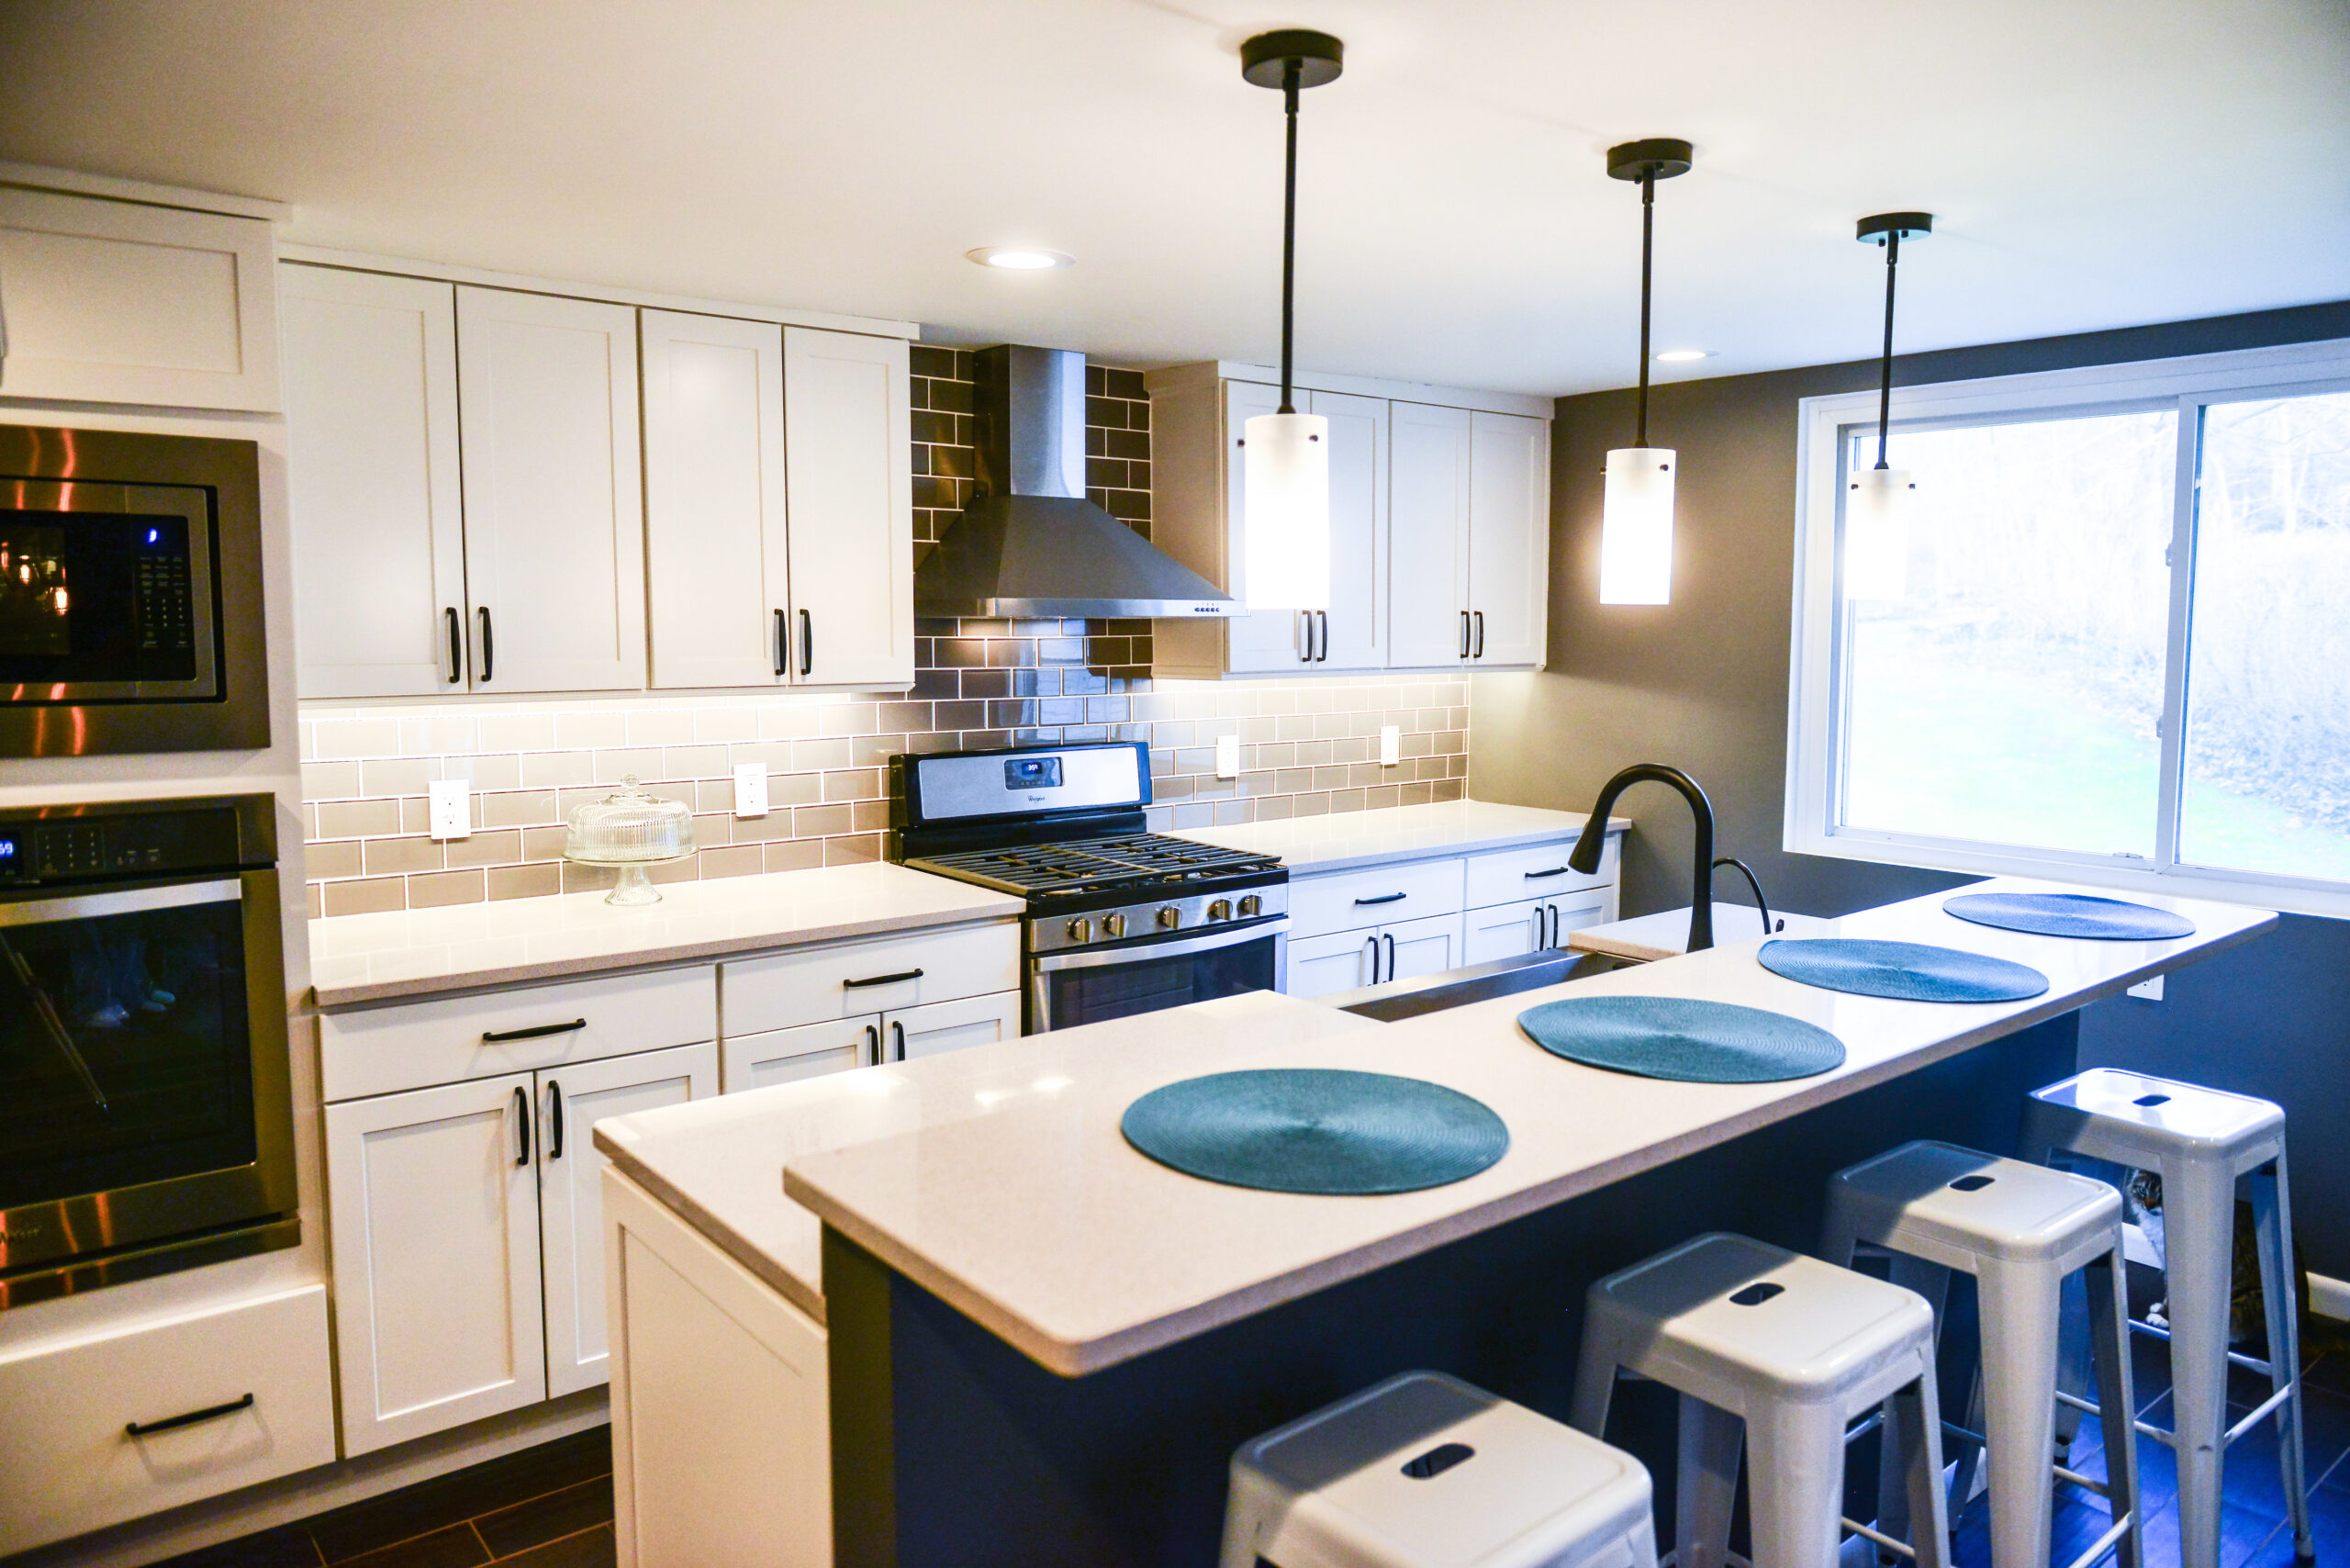 Mentor, Ohio Kitchen Remodeling Services